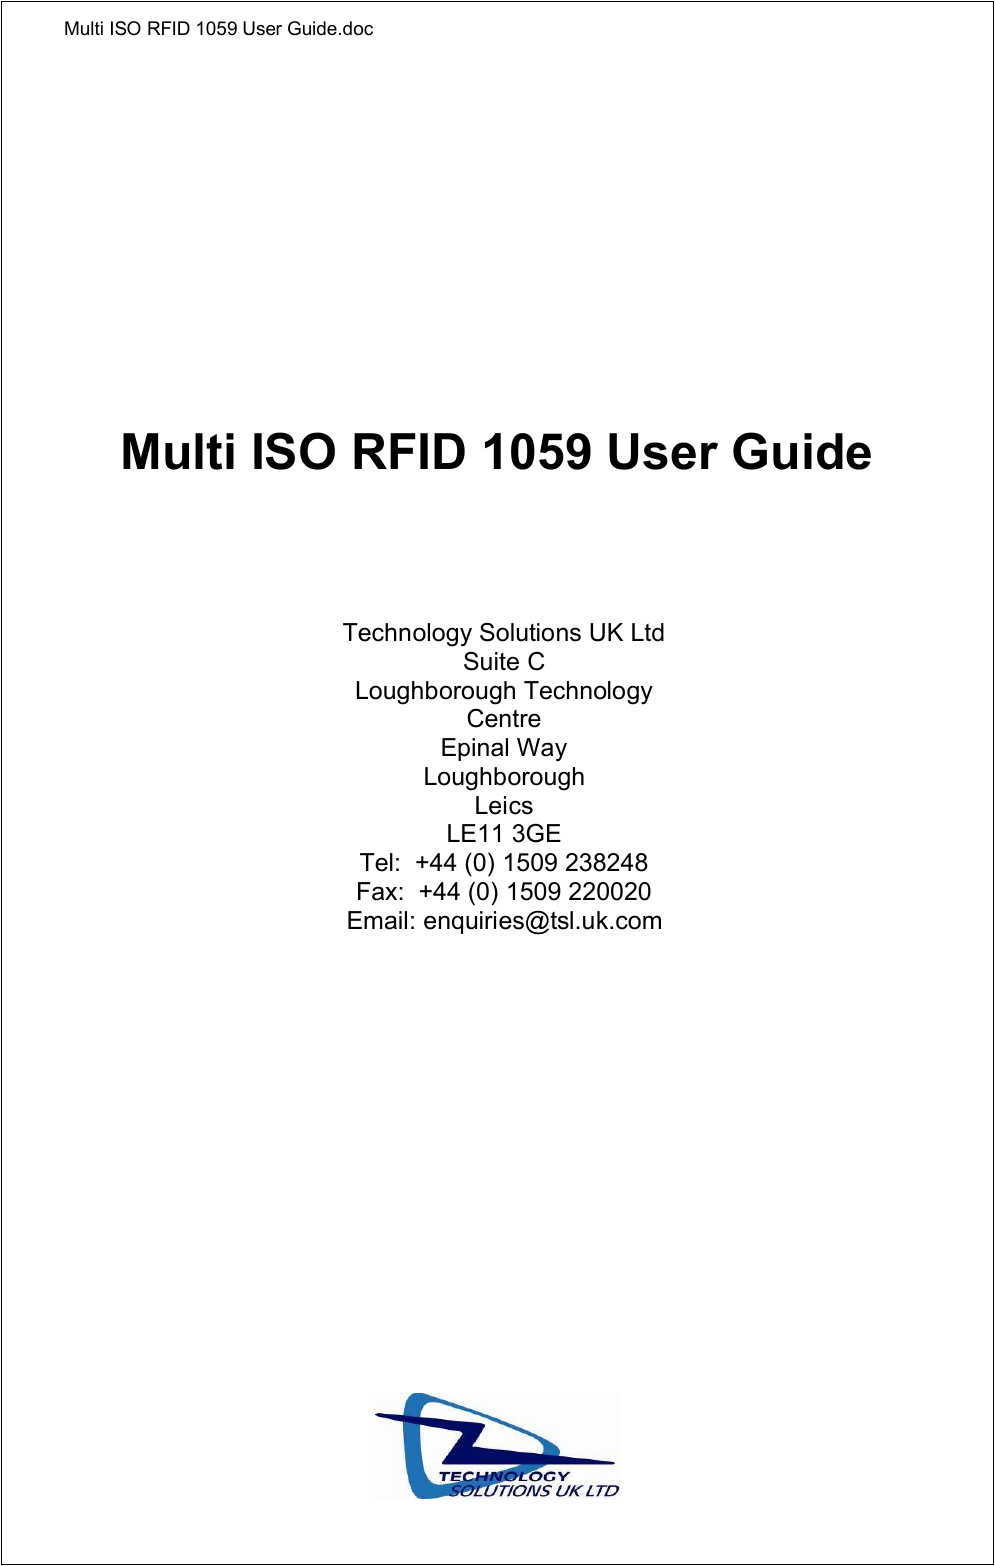 Multi ISO RFID 1059 User Guide.docMulti ISO RFID 1059 User GuideTechnology Solutions UK Ltd Suite CLoughborough Technology CentreEpinal WayLoughboroughLeicsLE11 3GETel:  +44 (0) 1509 238248Fax:  +44 (0) 1509 220020Email: enquiries@tsl.uk.com